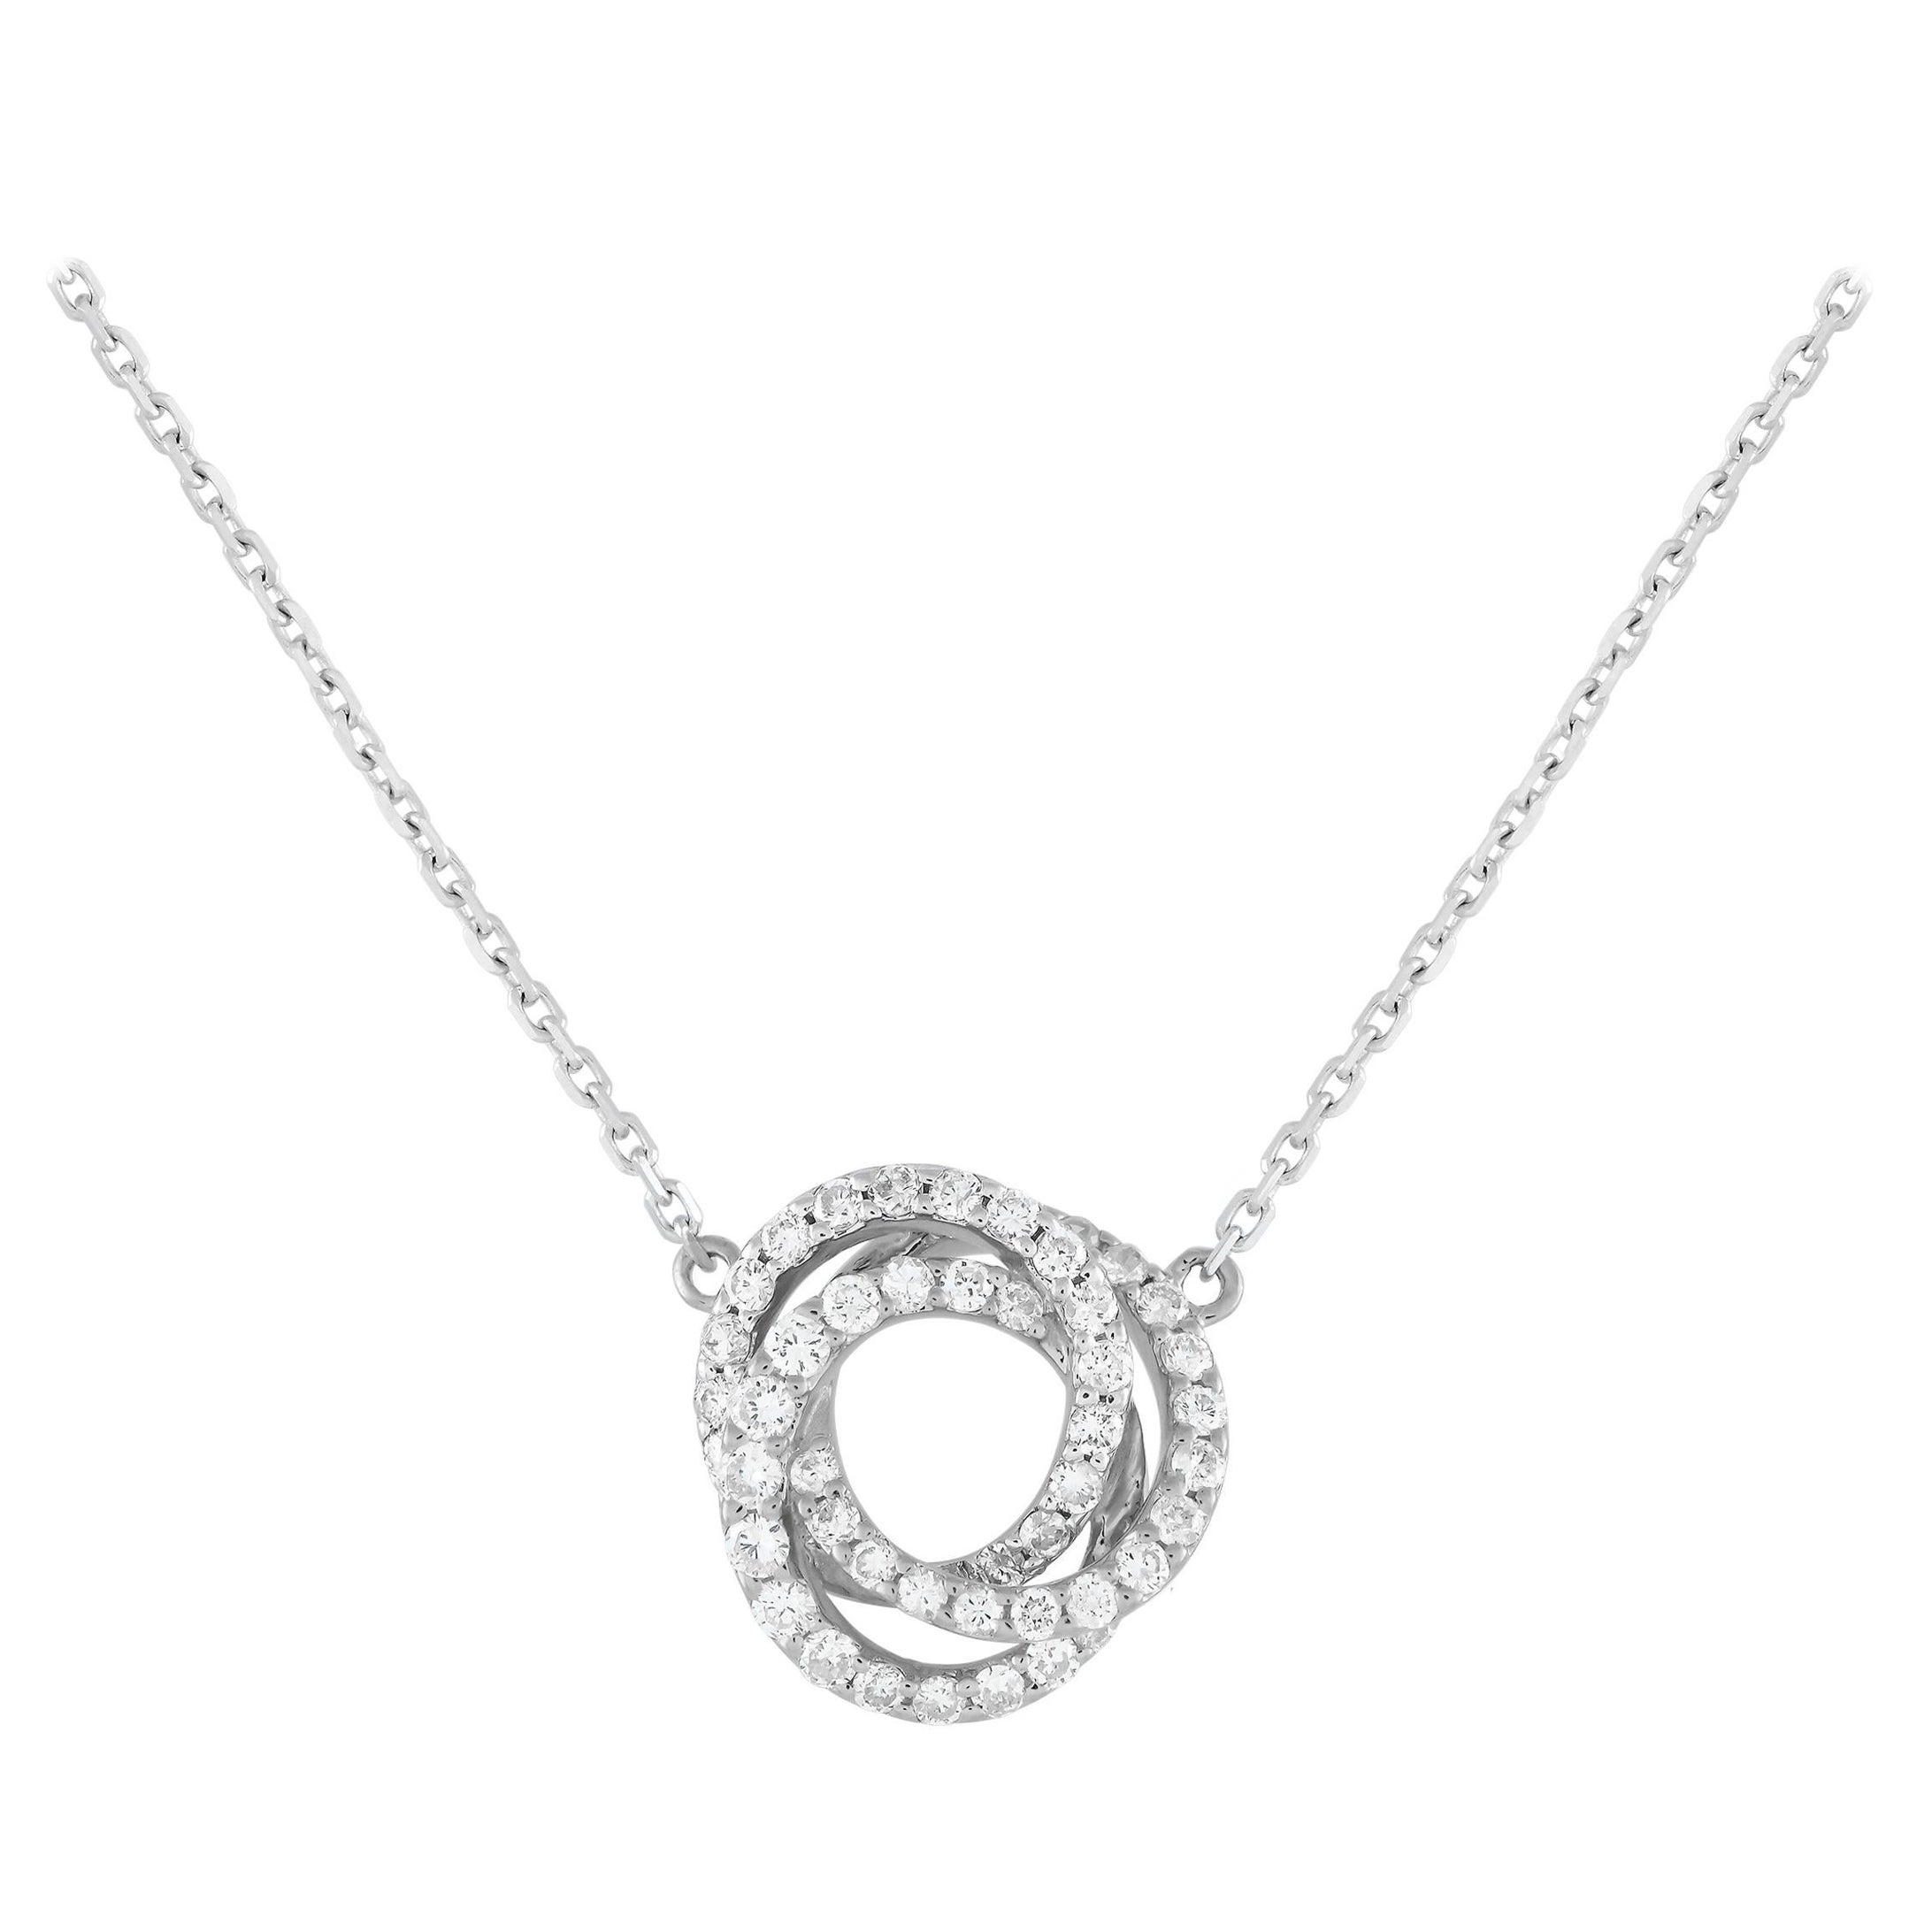 18K White Gold 0.50ct Diamond Triple Ring Necklace ANK-13200-W For Sale